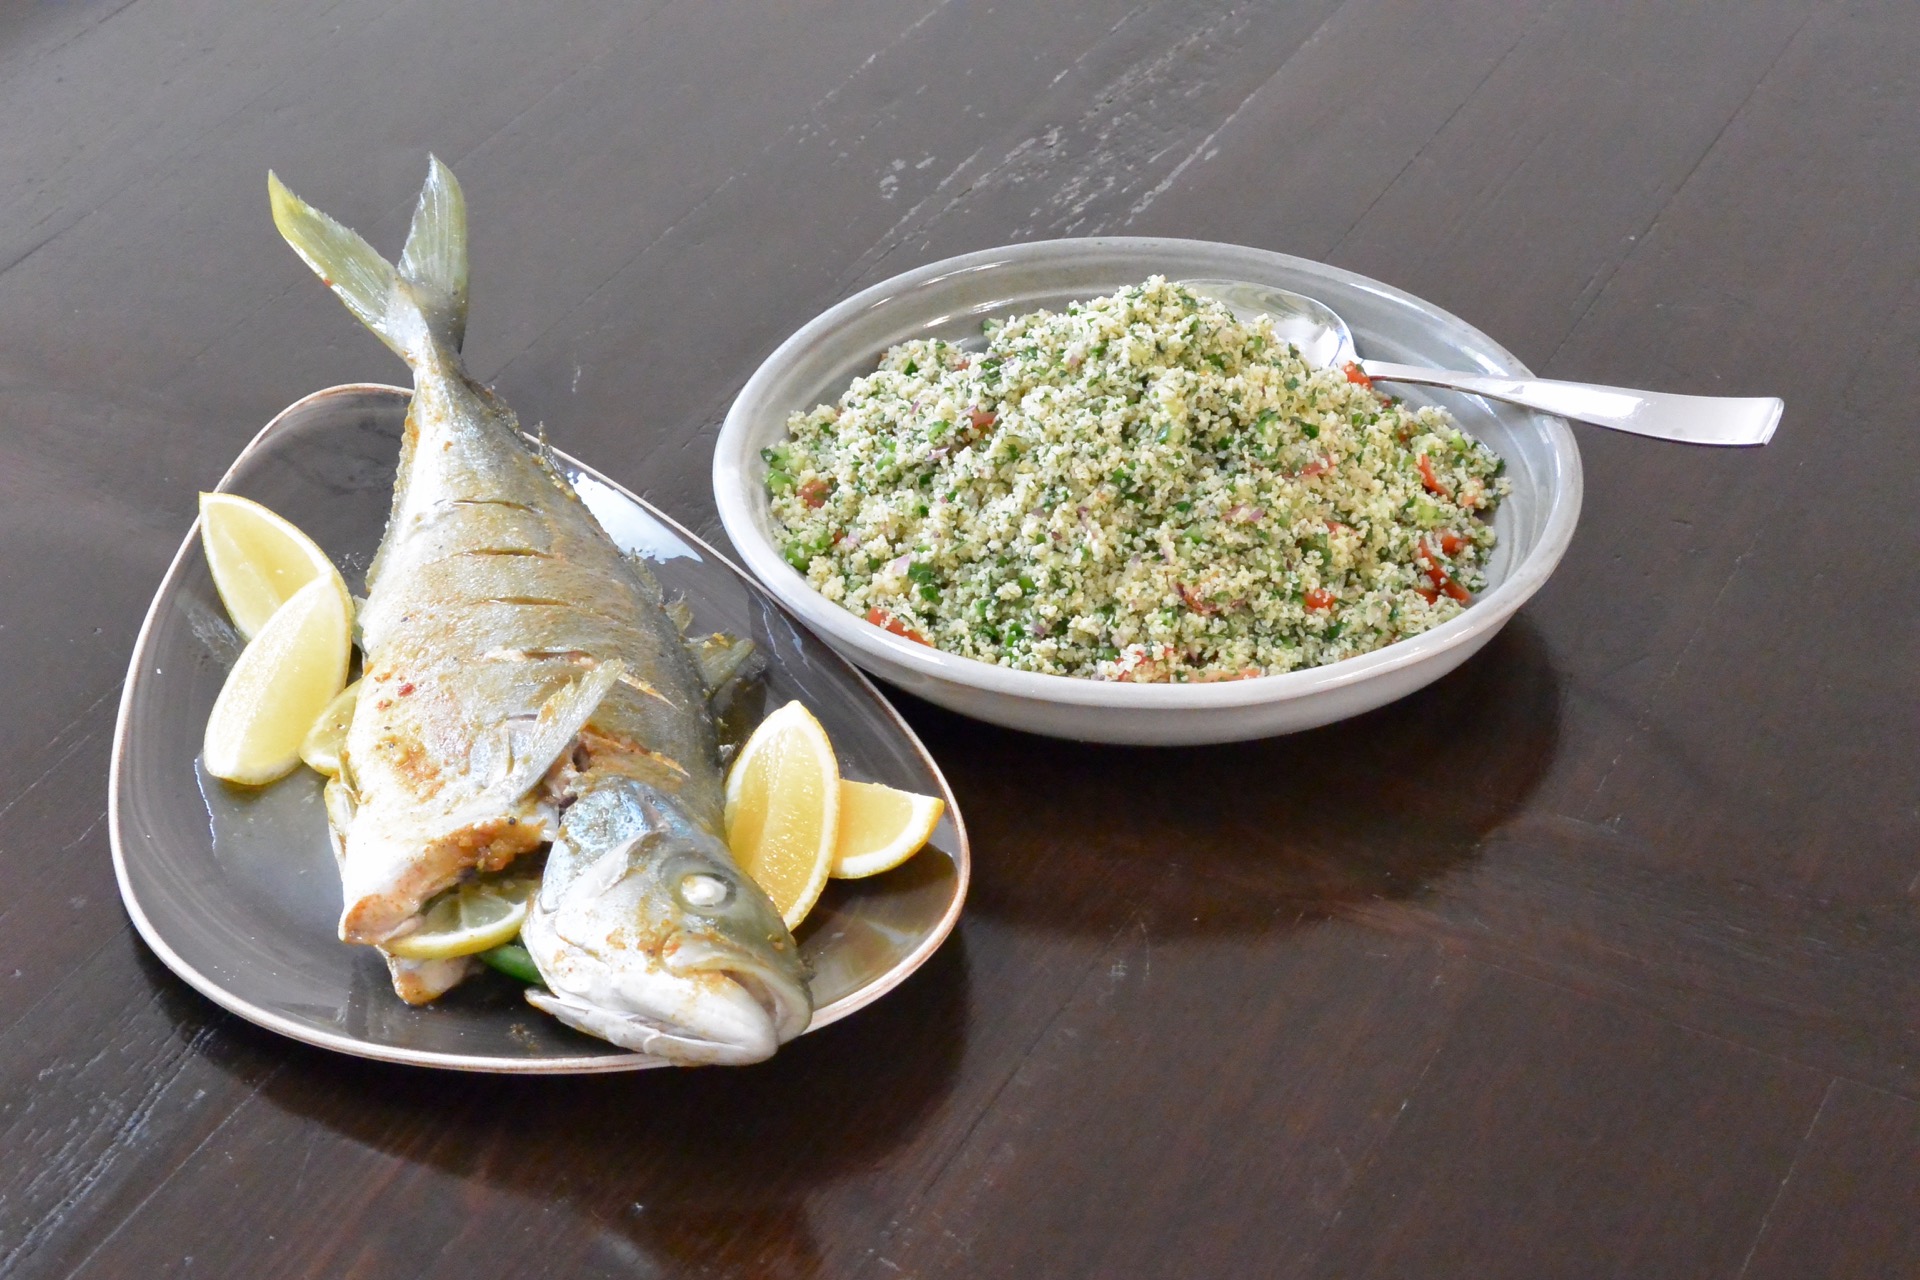 Combi Steam Oven Recipes I Cooking with Steam - Whole Steamed Kingfish with  Chermoula Spices and Tabbouleh